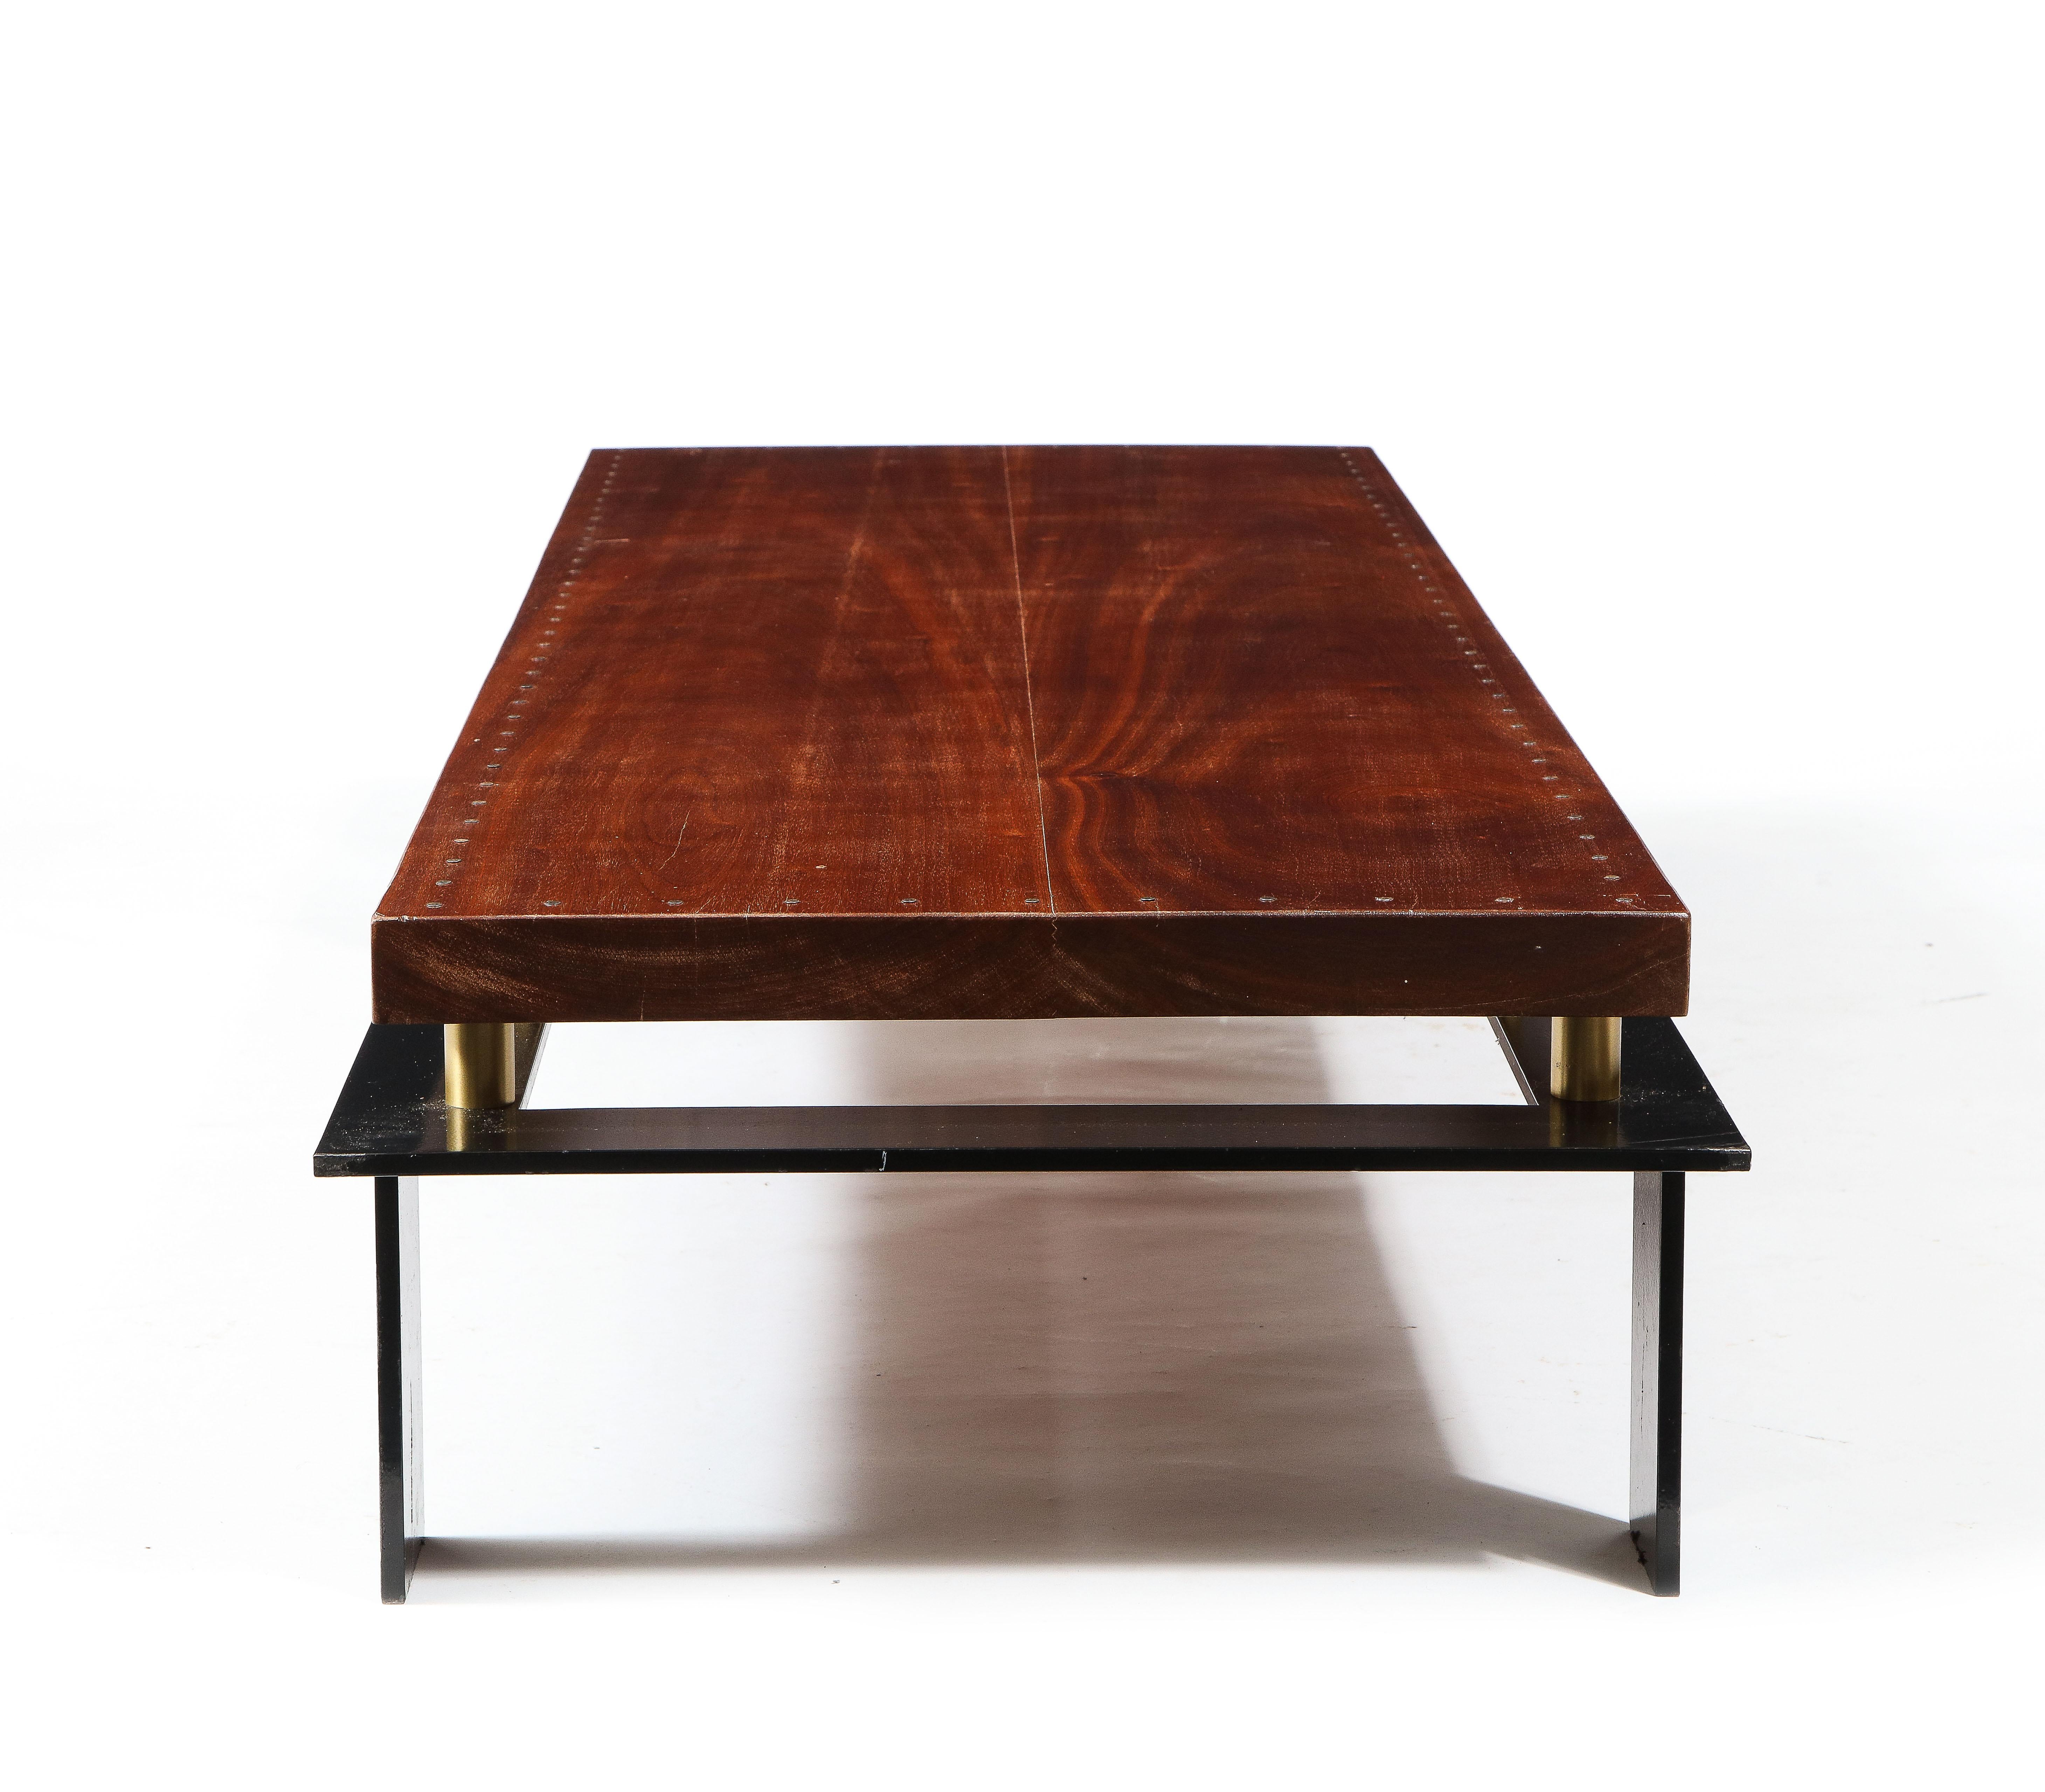 Large Long Low Modernist Steel & Walnut Coffee Table, France 1970's For Sale 4